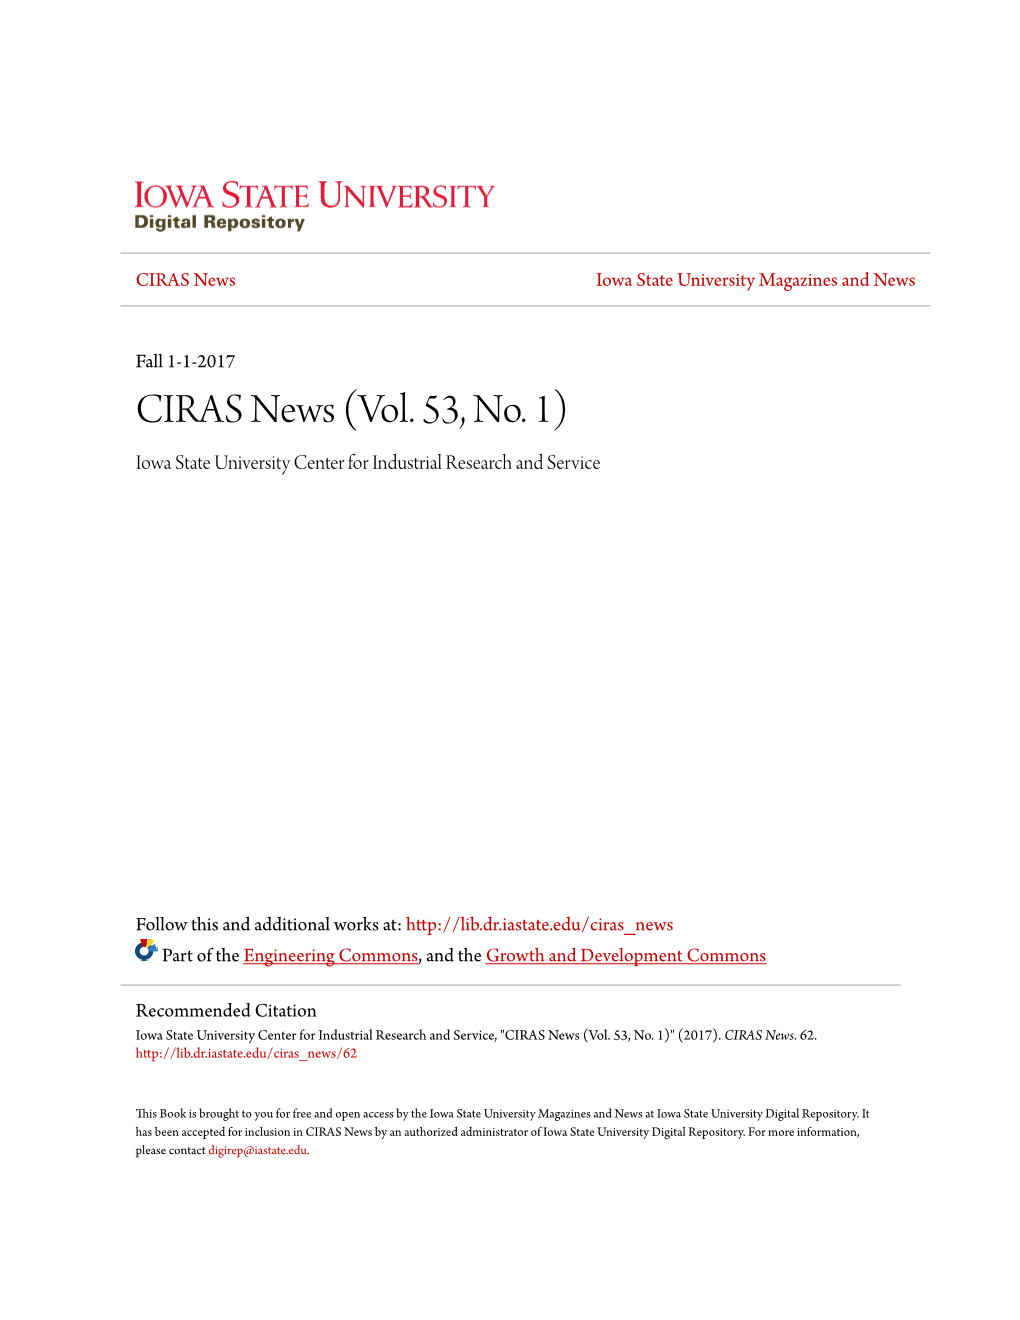 CIRAS News (Vol. 53, No. 1) Iowa State University Center for Industrial Research and Service